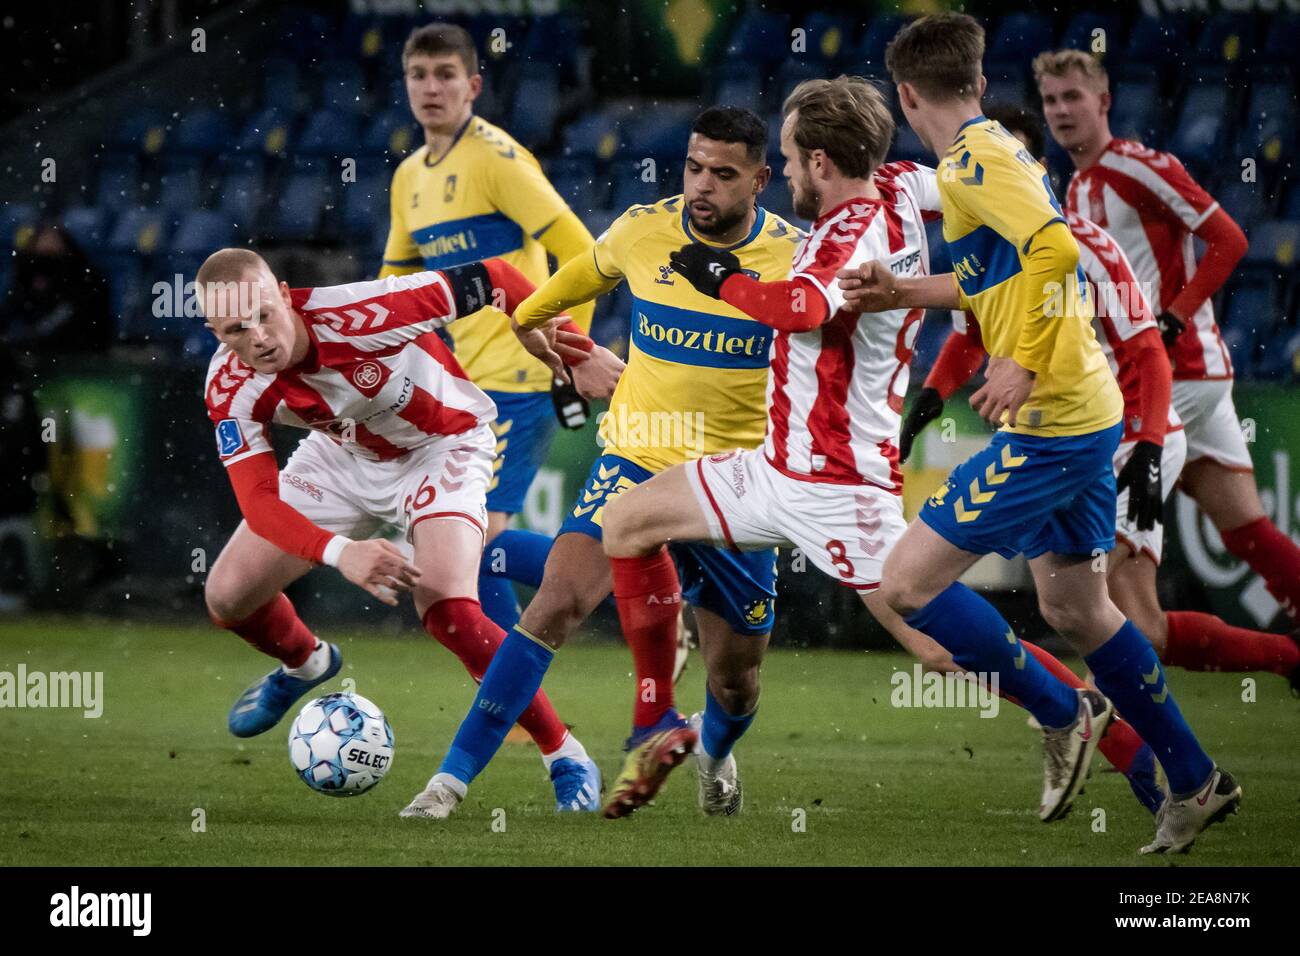 Broendby, Denmark. 7th, February 2021. Anis Ben Slimane (25) of Broendby IF seen during the 3F Superliga match between Broendby IF and Aalborg Boldspilklub on Broendby Stadium, Broendby. (Photo credit: Gonzales Photo - Kim Matthäi Leland). Stock Photo